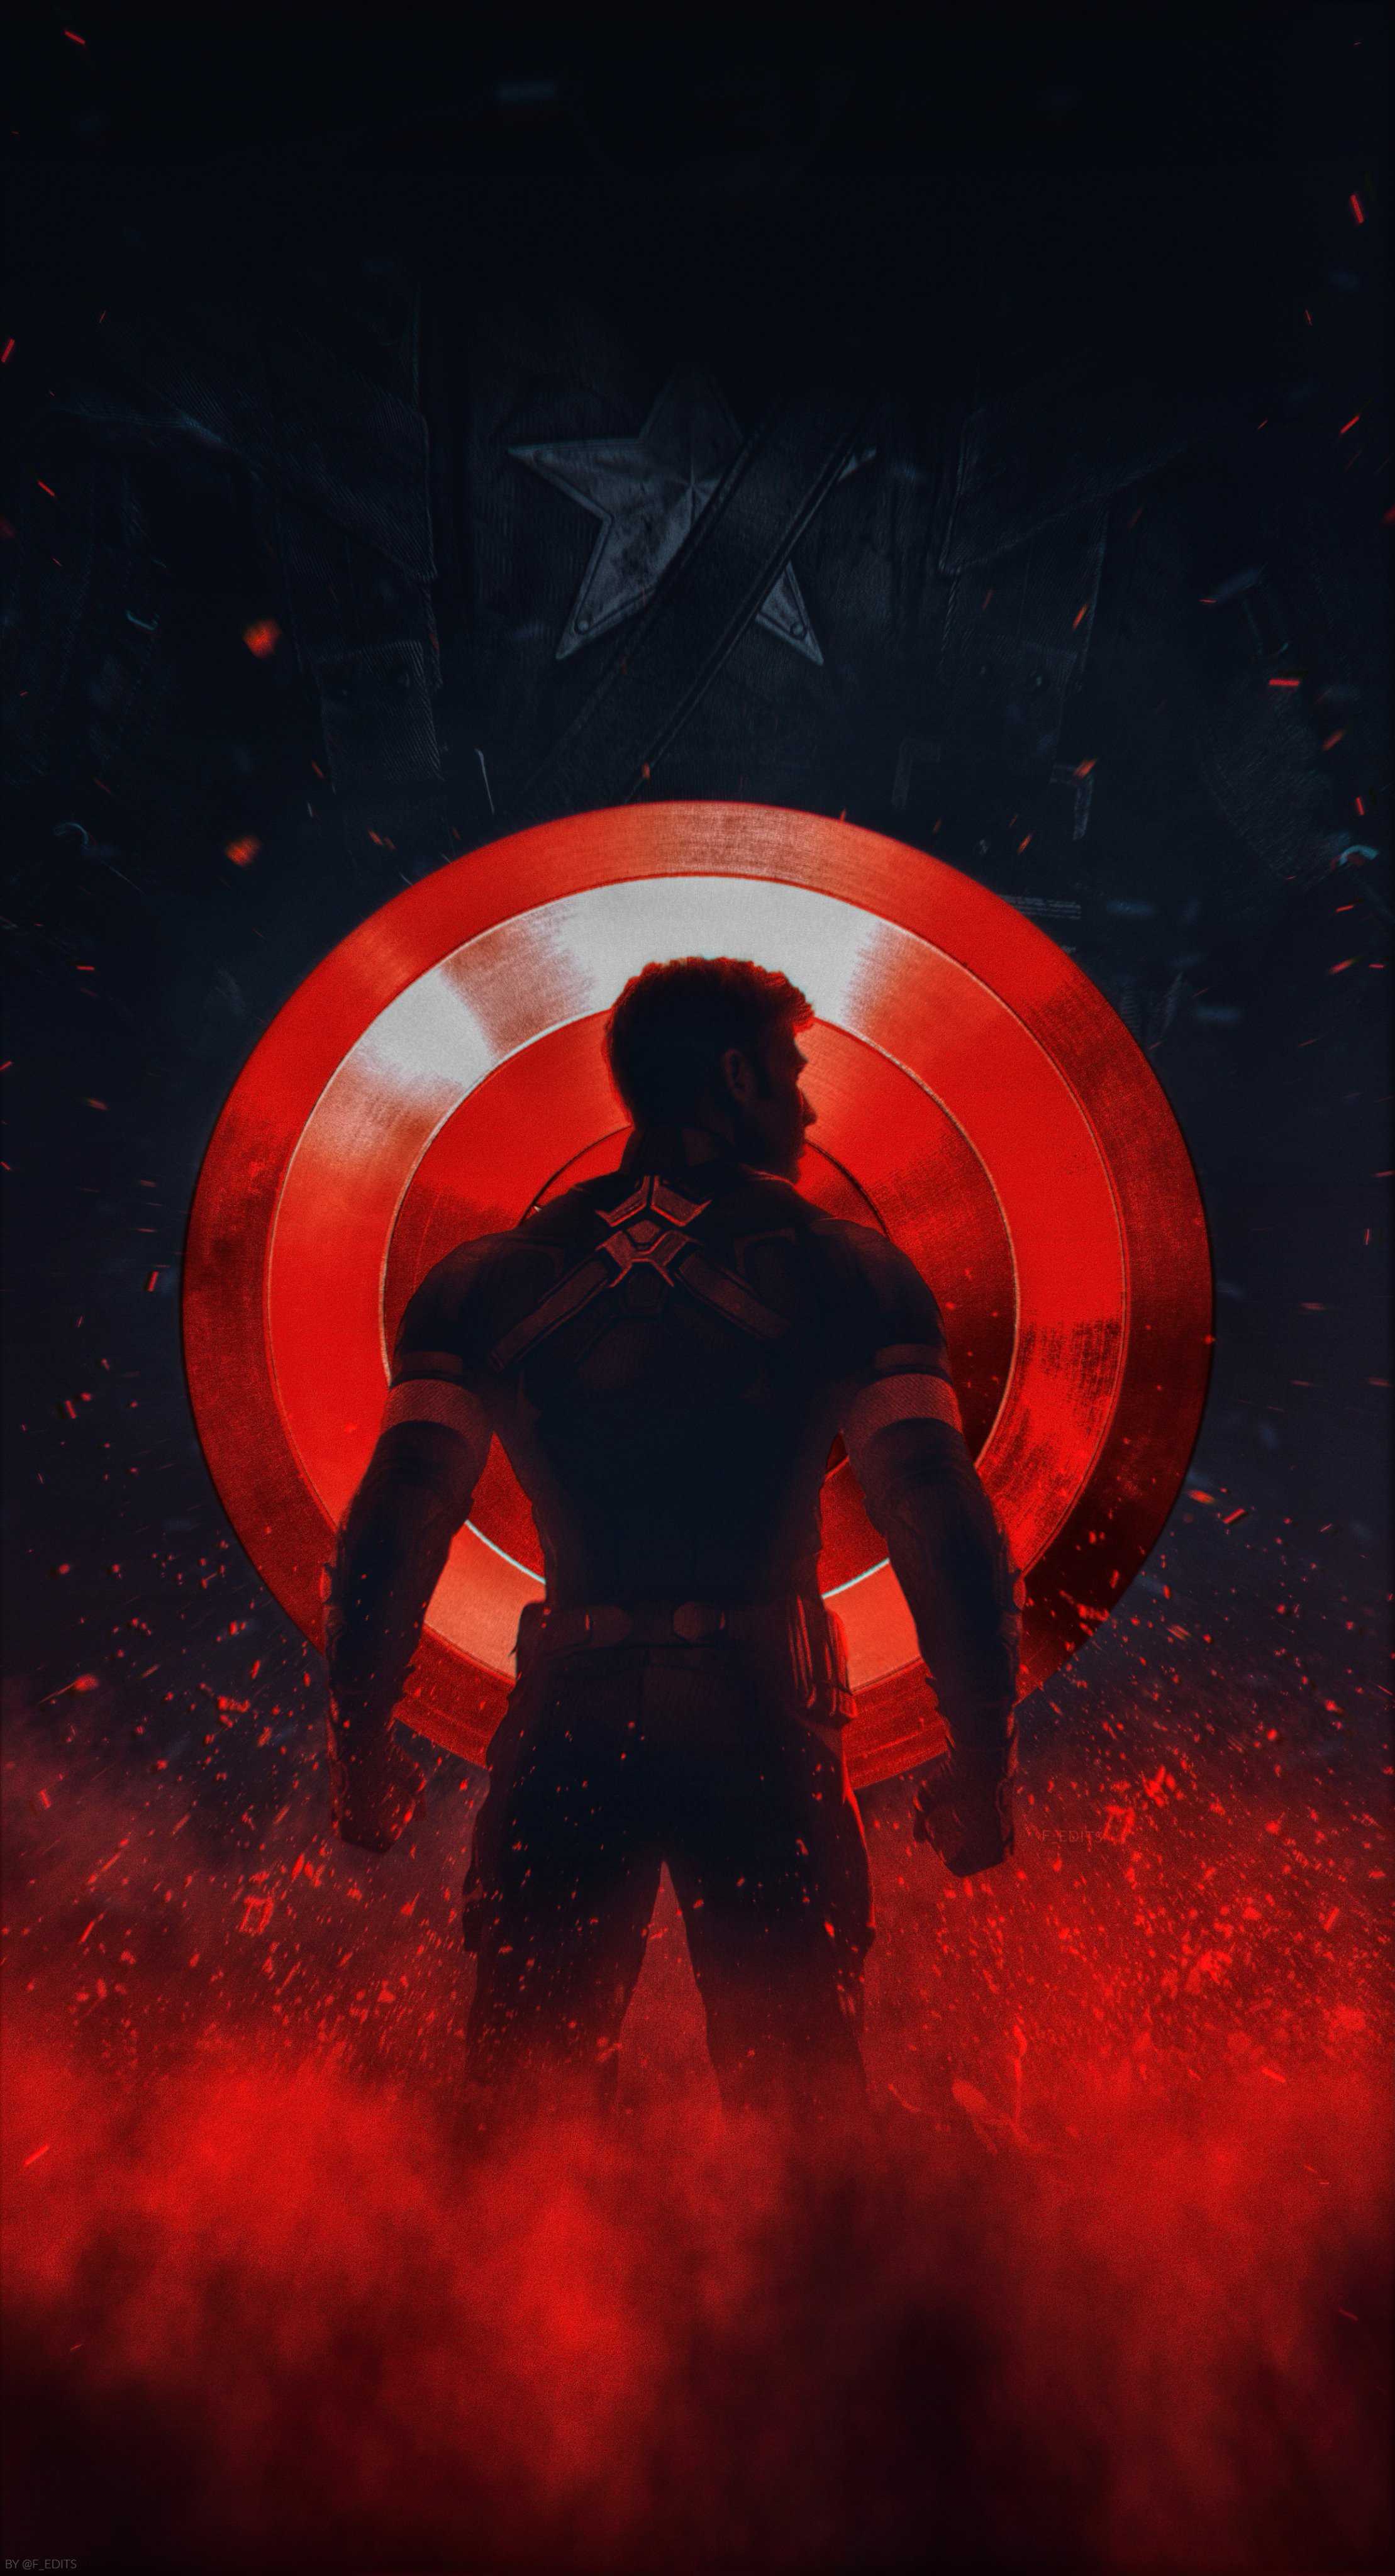 Captain America Mobile Wallpapers